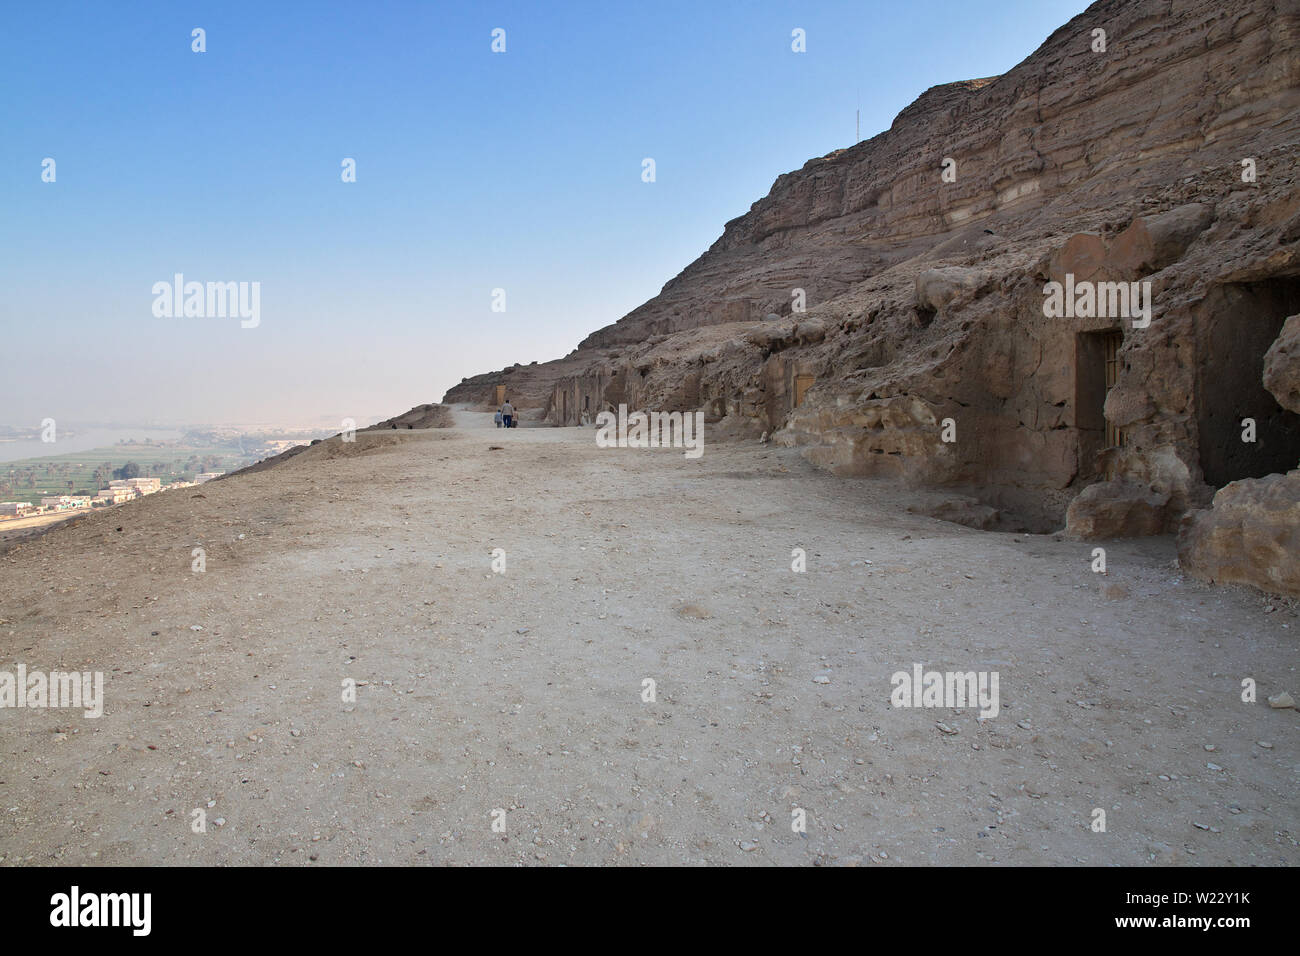 Tombs of the pharaohs in Amarna on the banks of the Nile, Egypt Stock Photo